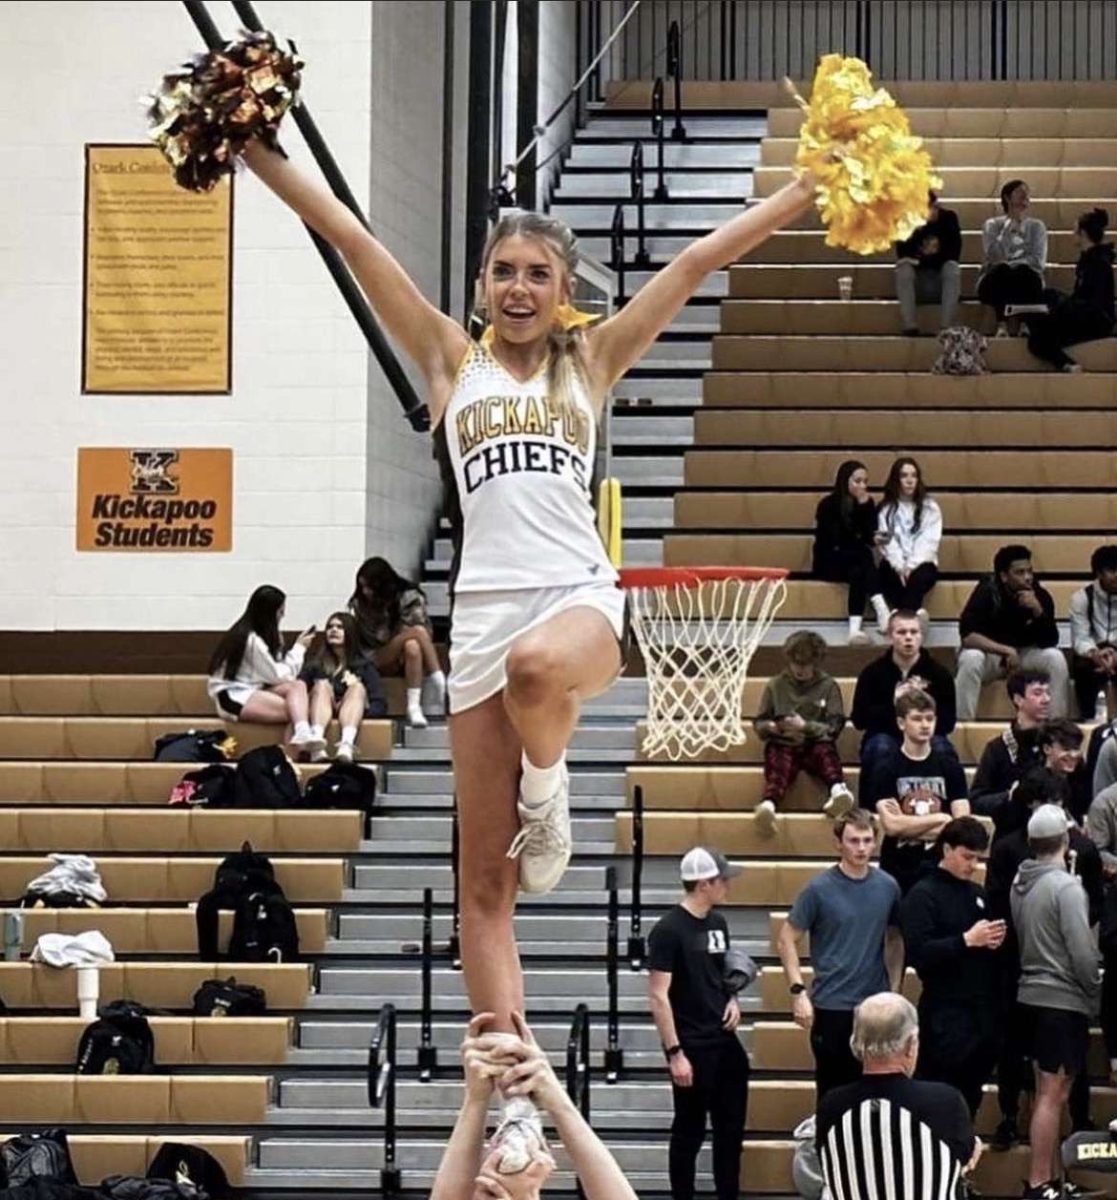 Kate Black being stunted by her teammates at a basketball game.